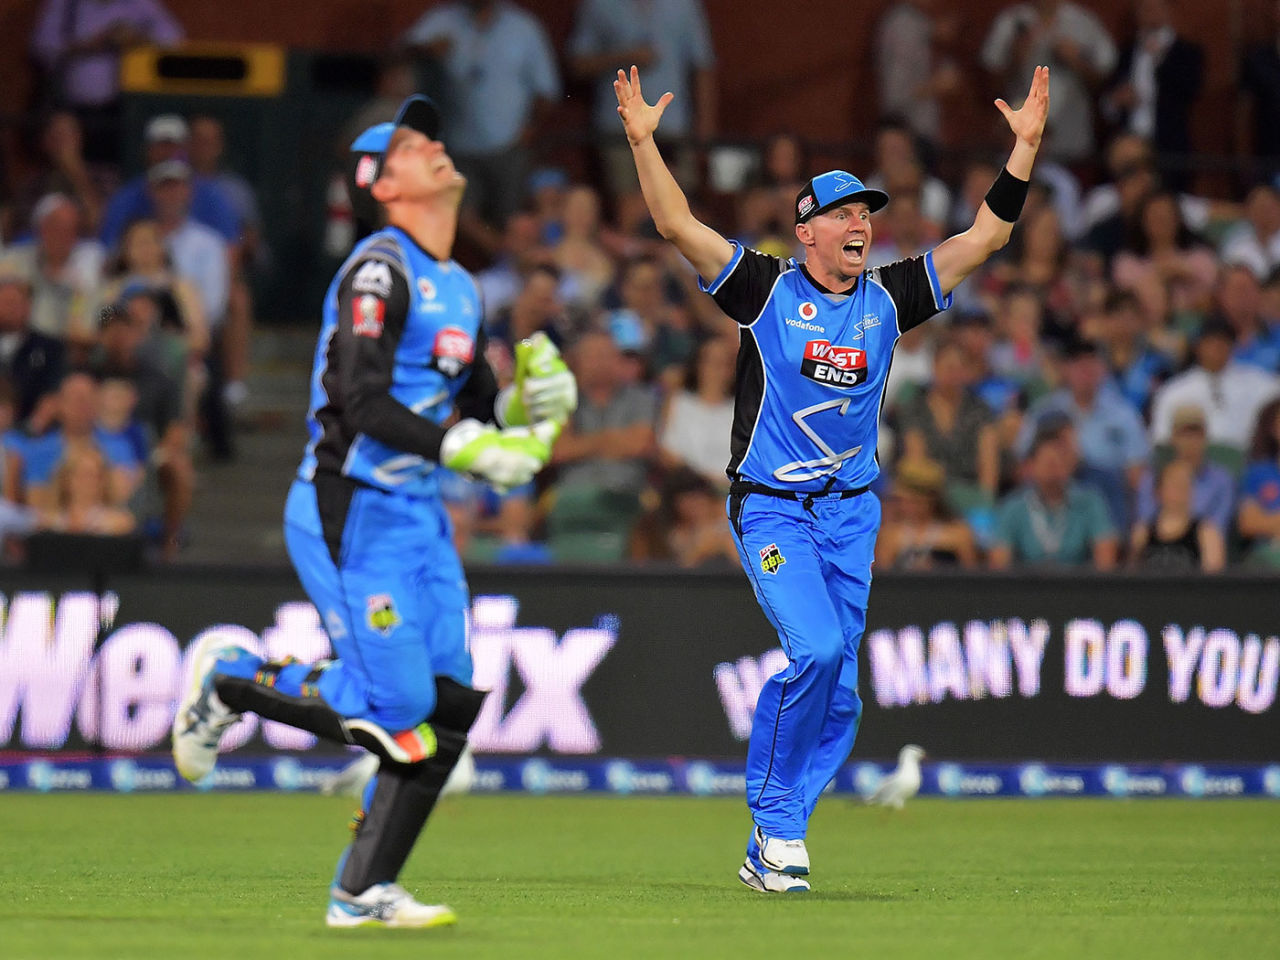 Peter Siddle celebrates a wicket, Adelaide Strikers v Hobart Hurricanes, BBL 2017-18, Adelaide, January 17, 2018 